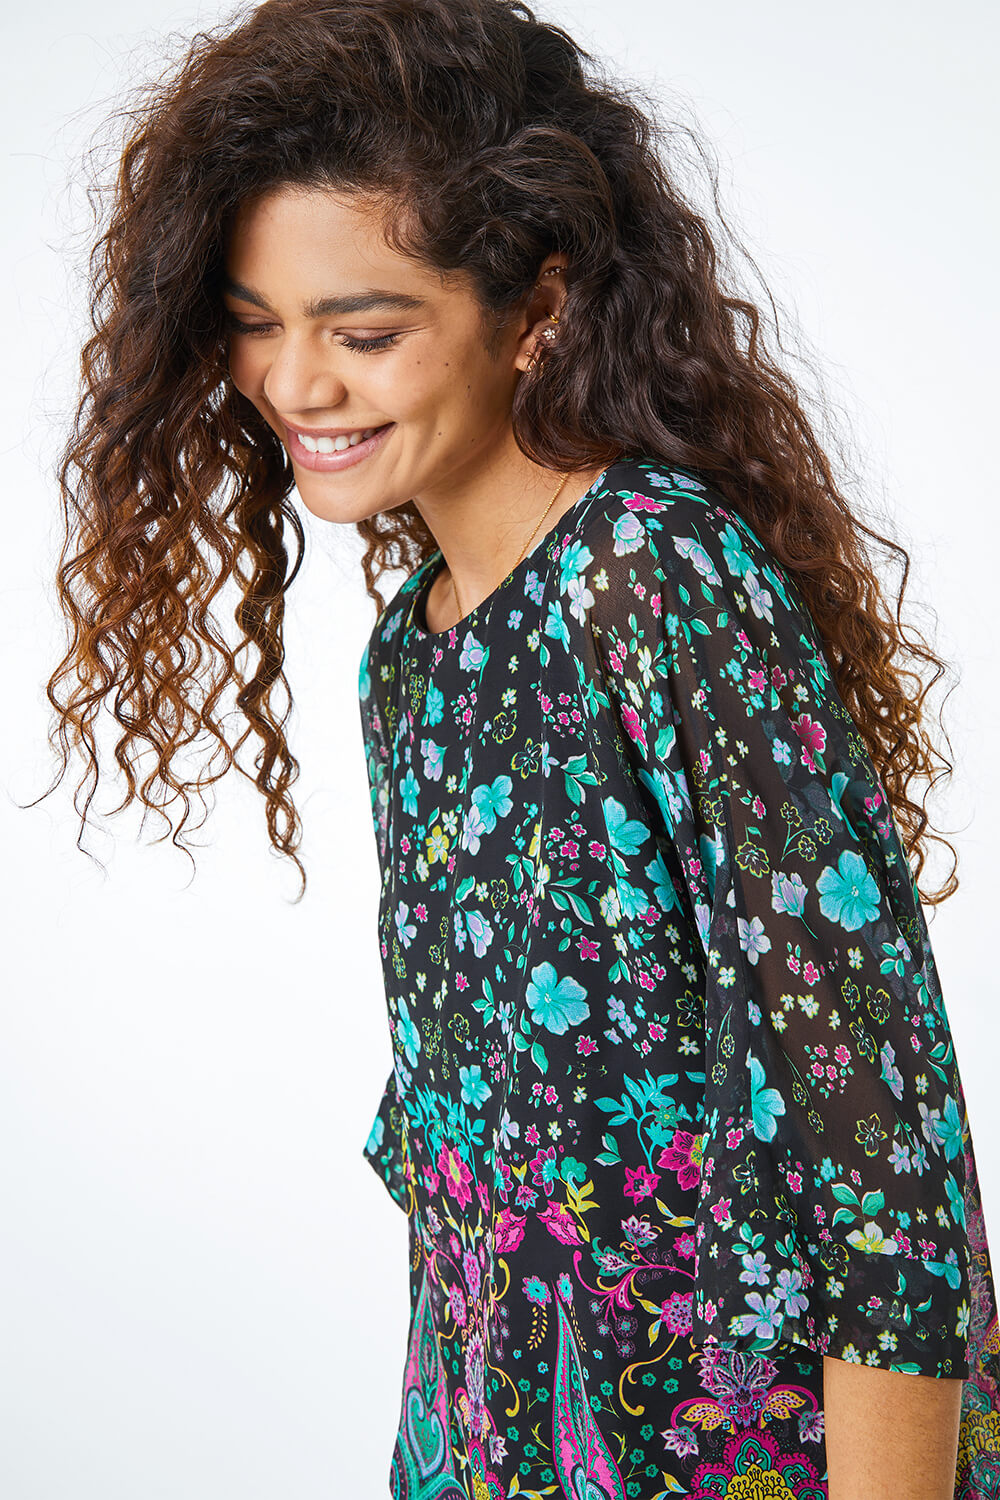 Green Floral Border Print Overlay Top, Image 4 of 5